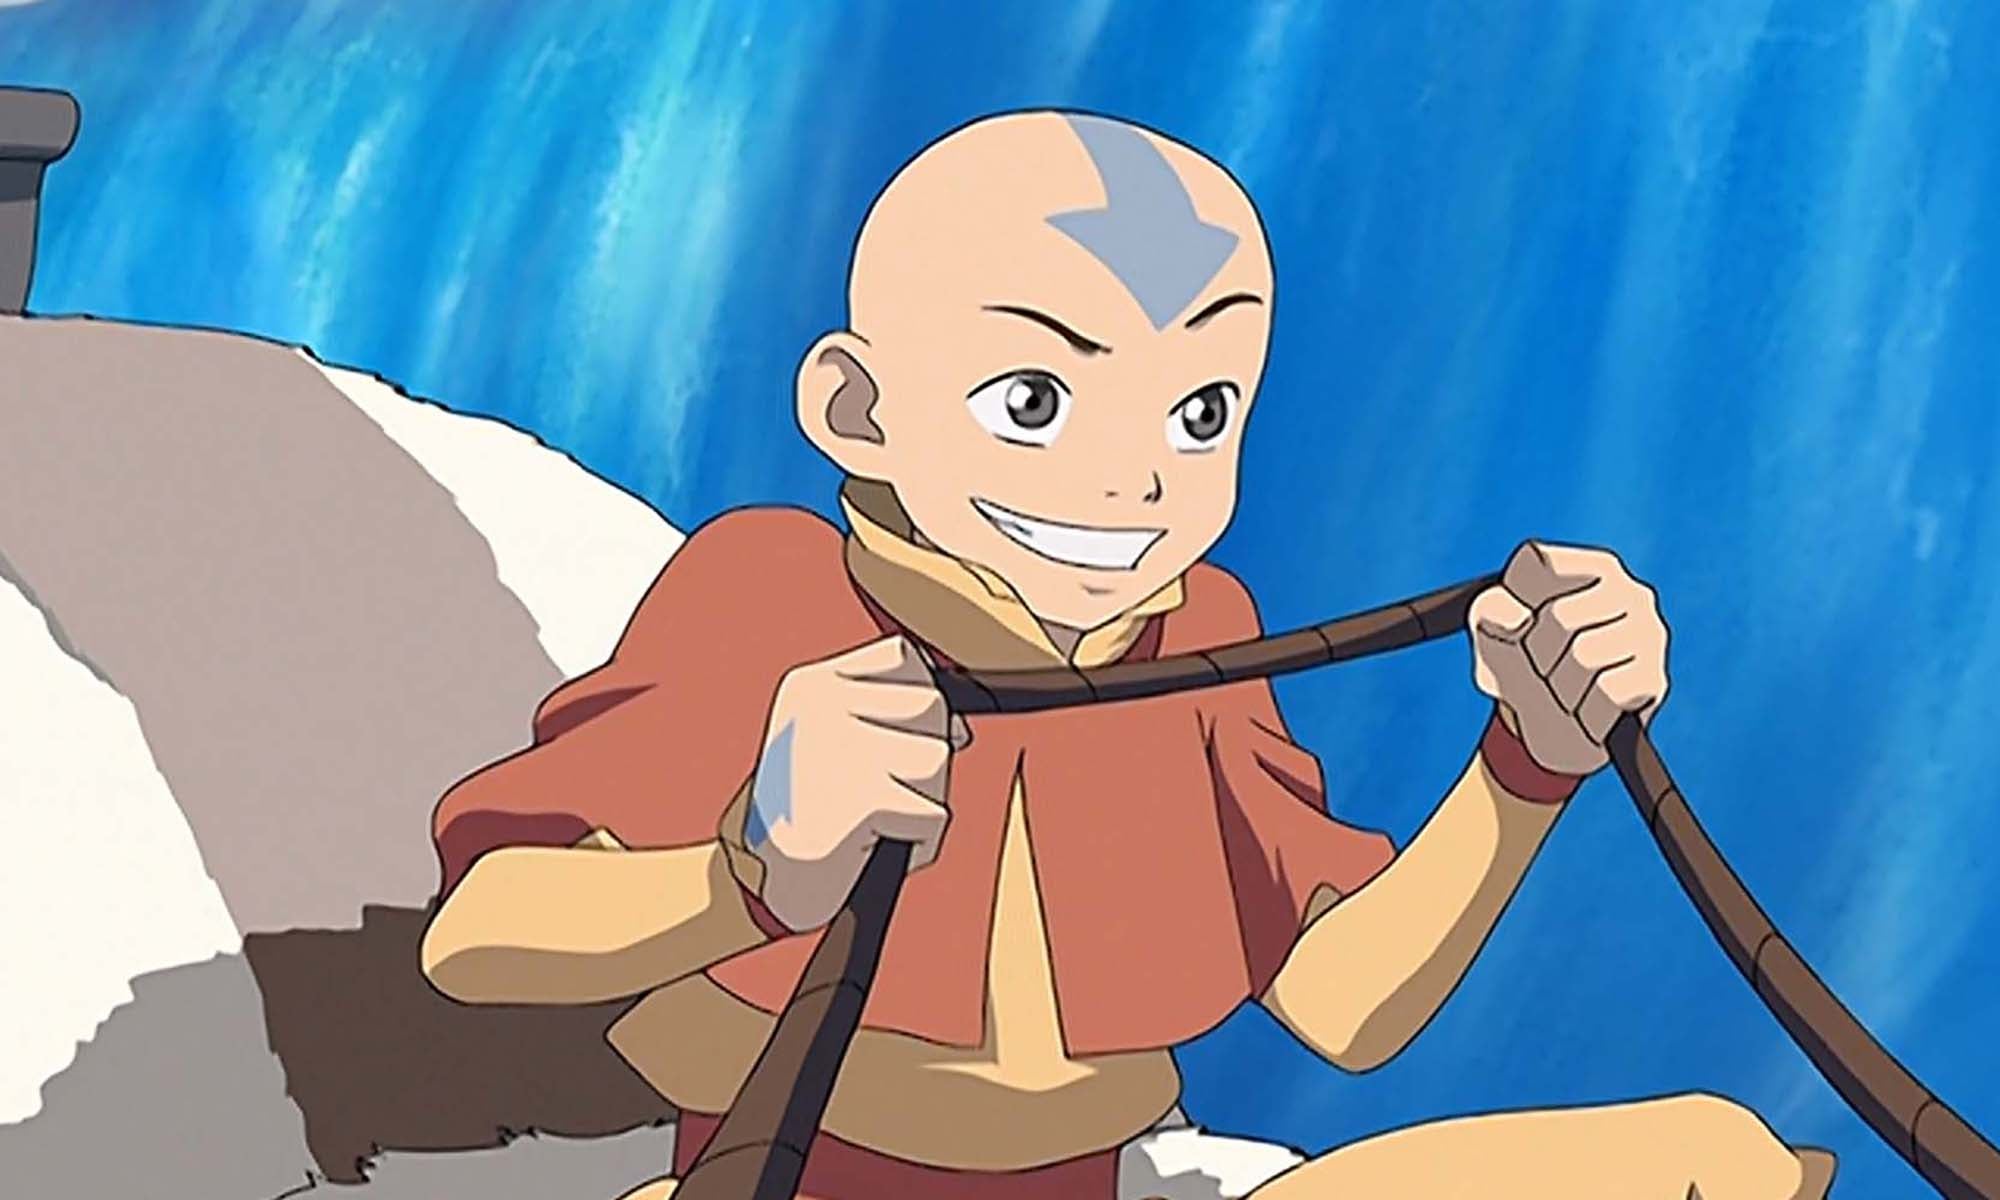 Avatar The Last Airbender Imagines a World Free of Whiteness  The New  York Times